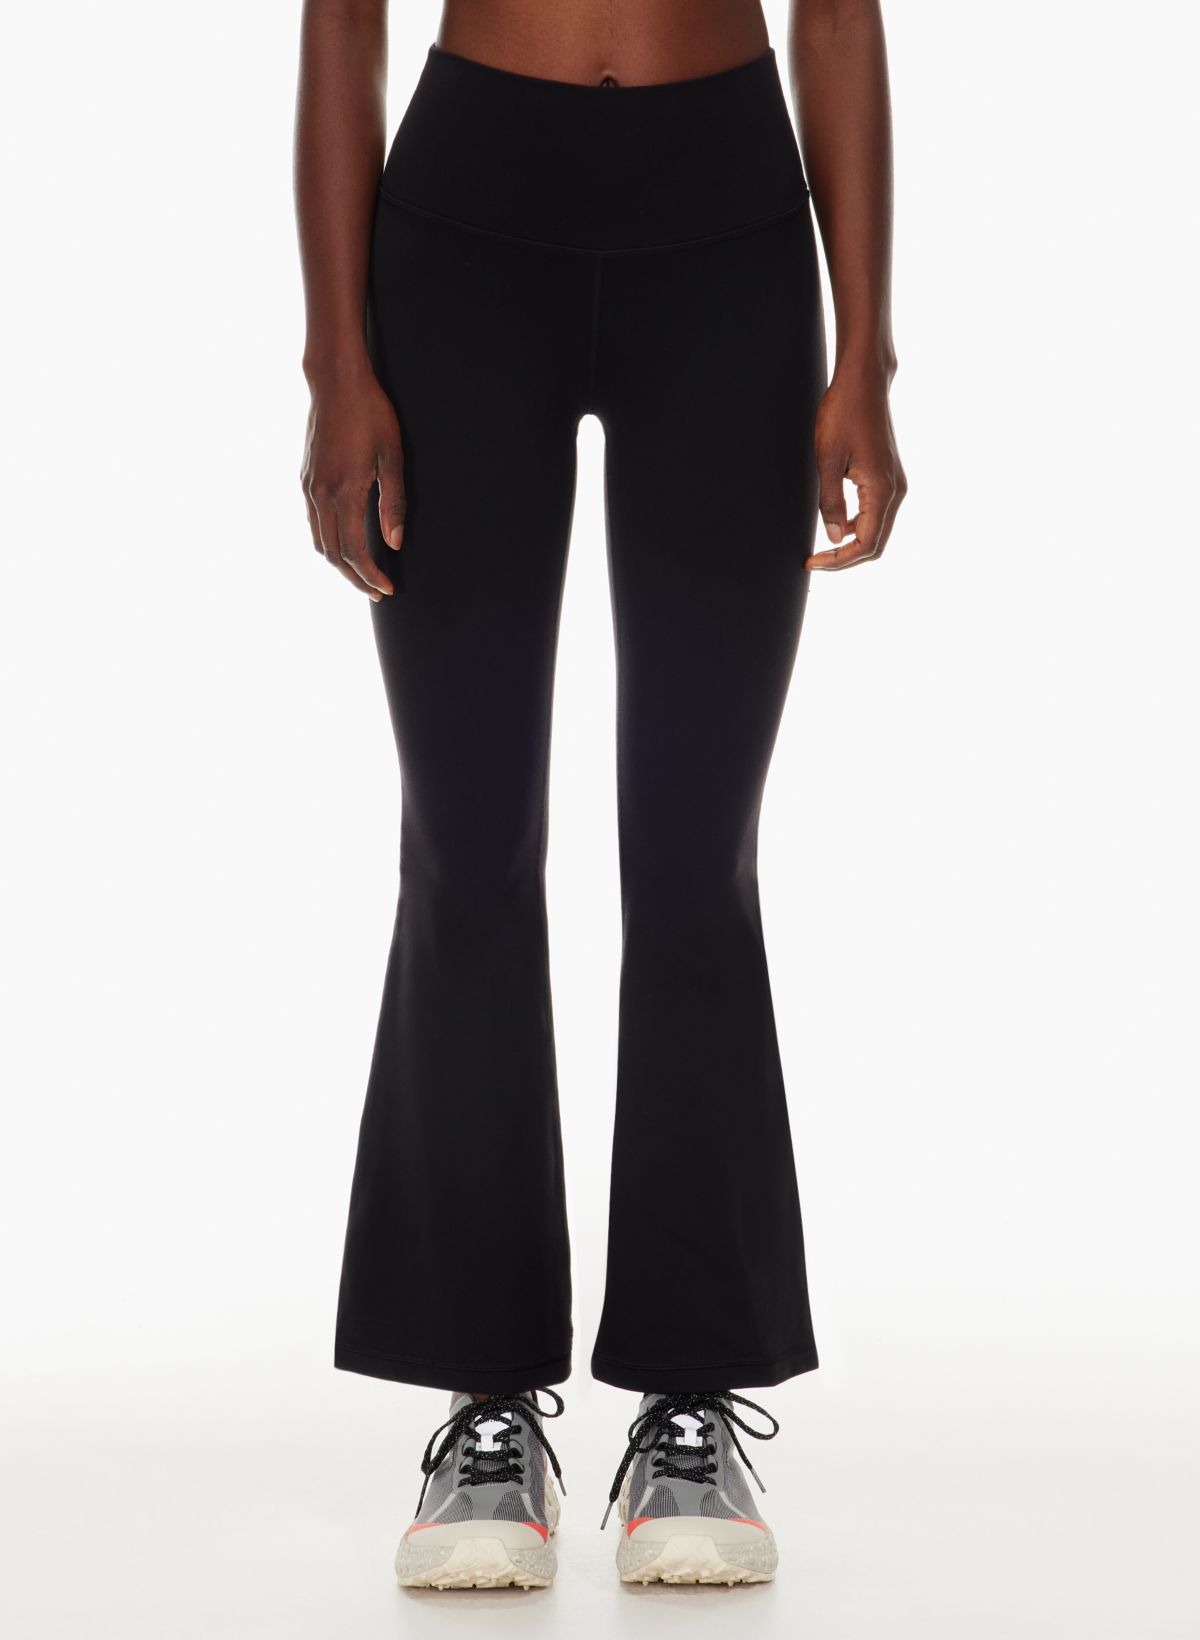 High Waist Flared Aritzia Flare Leggings For Women Solid Color